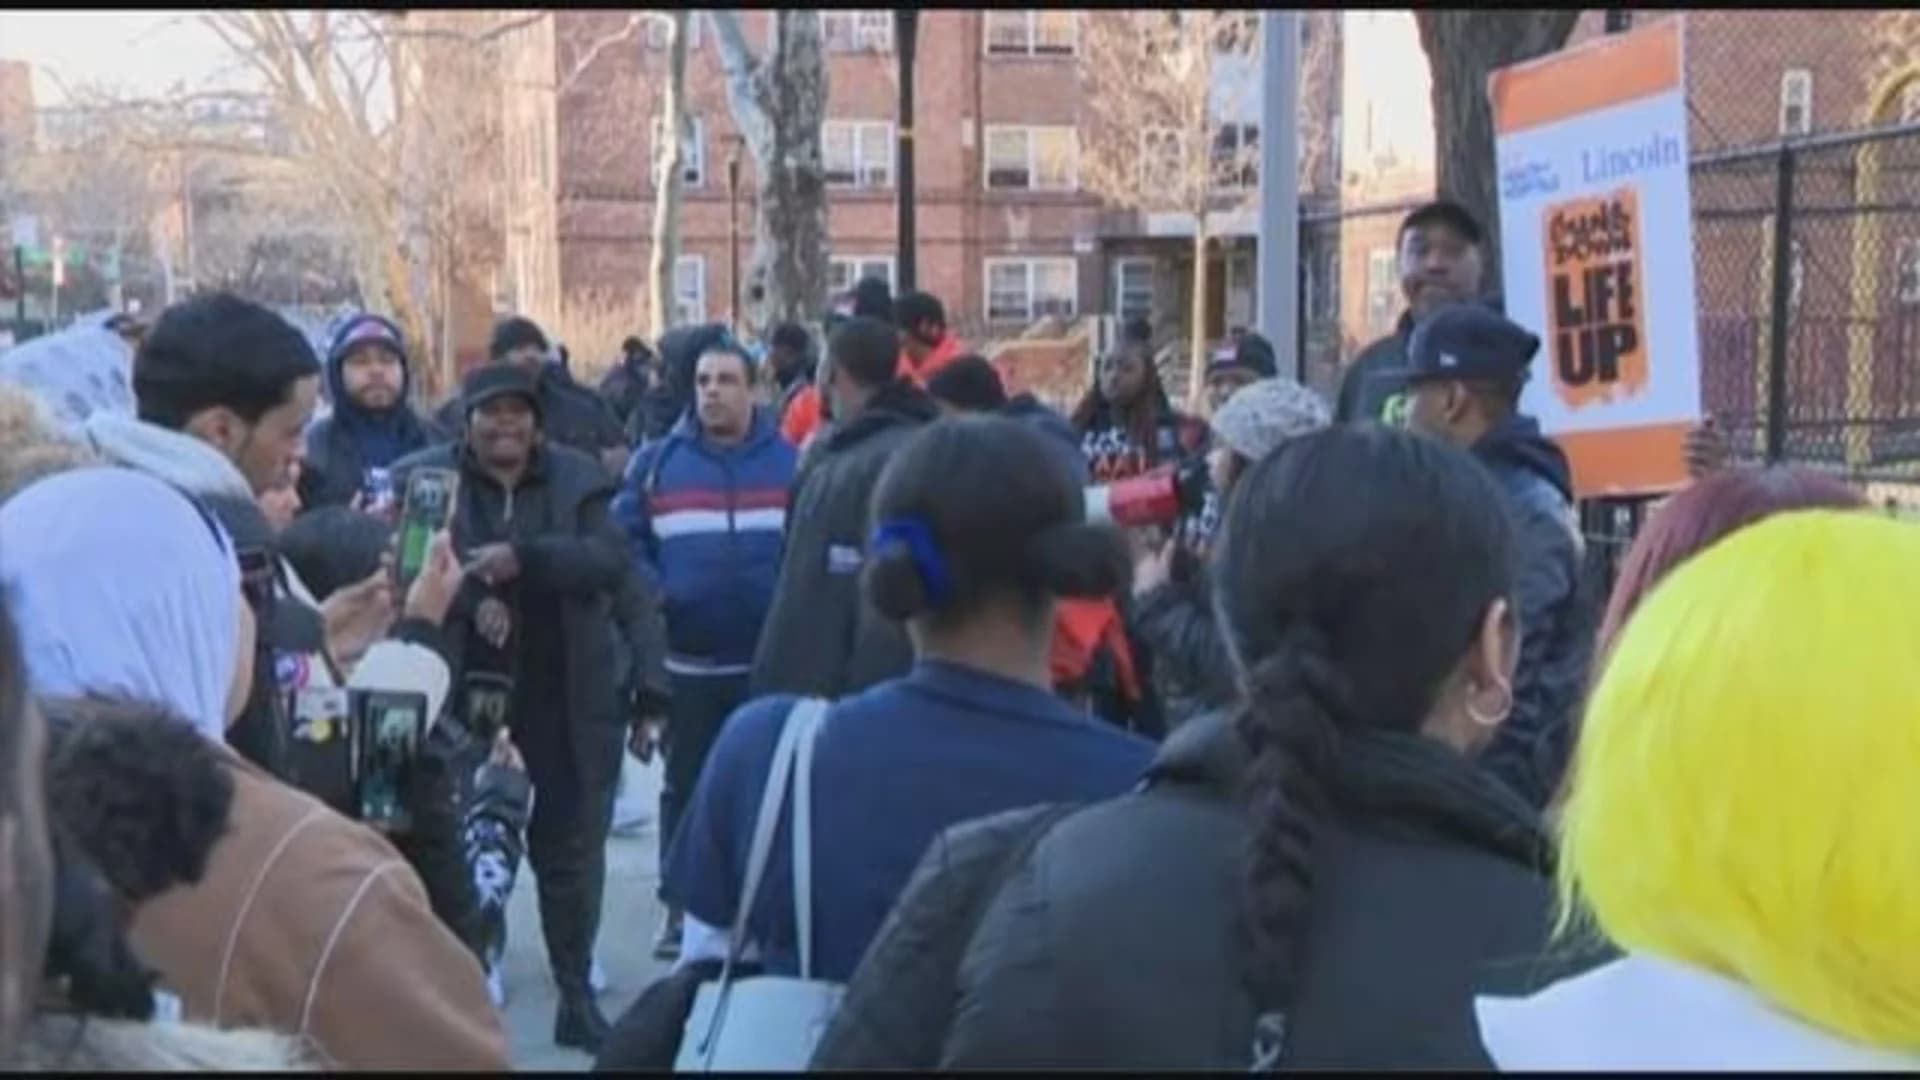 Shooting near Patterson Houses prompts rally for justice